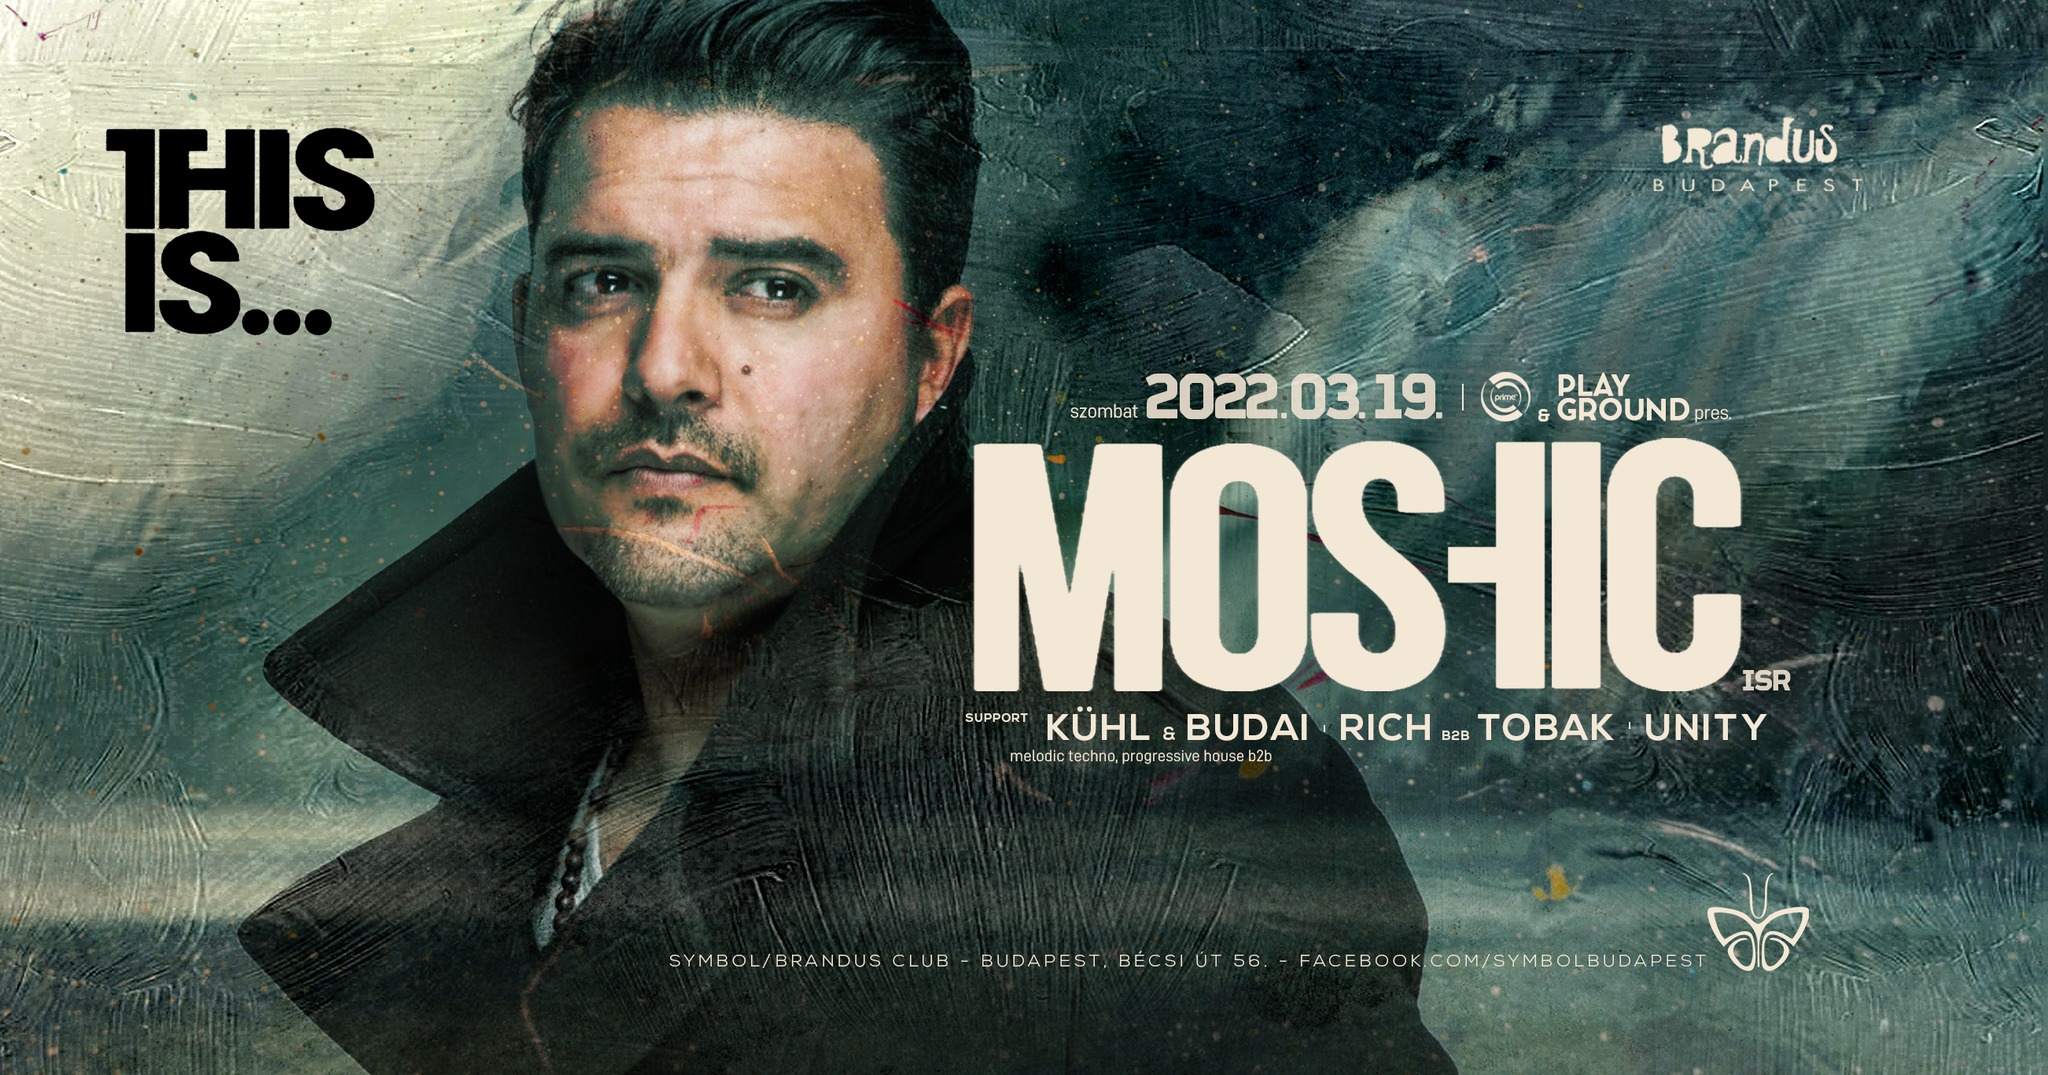 THIs is Moshic (Isr) - フライヤー表